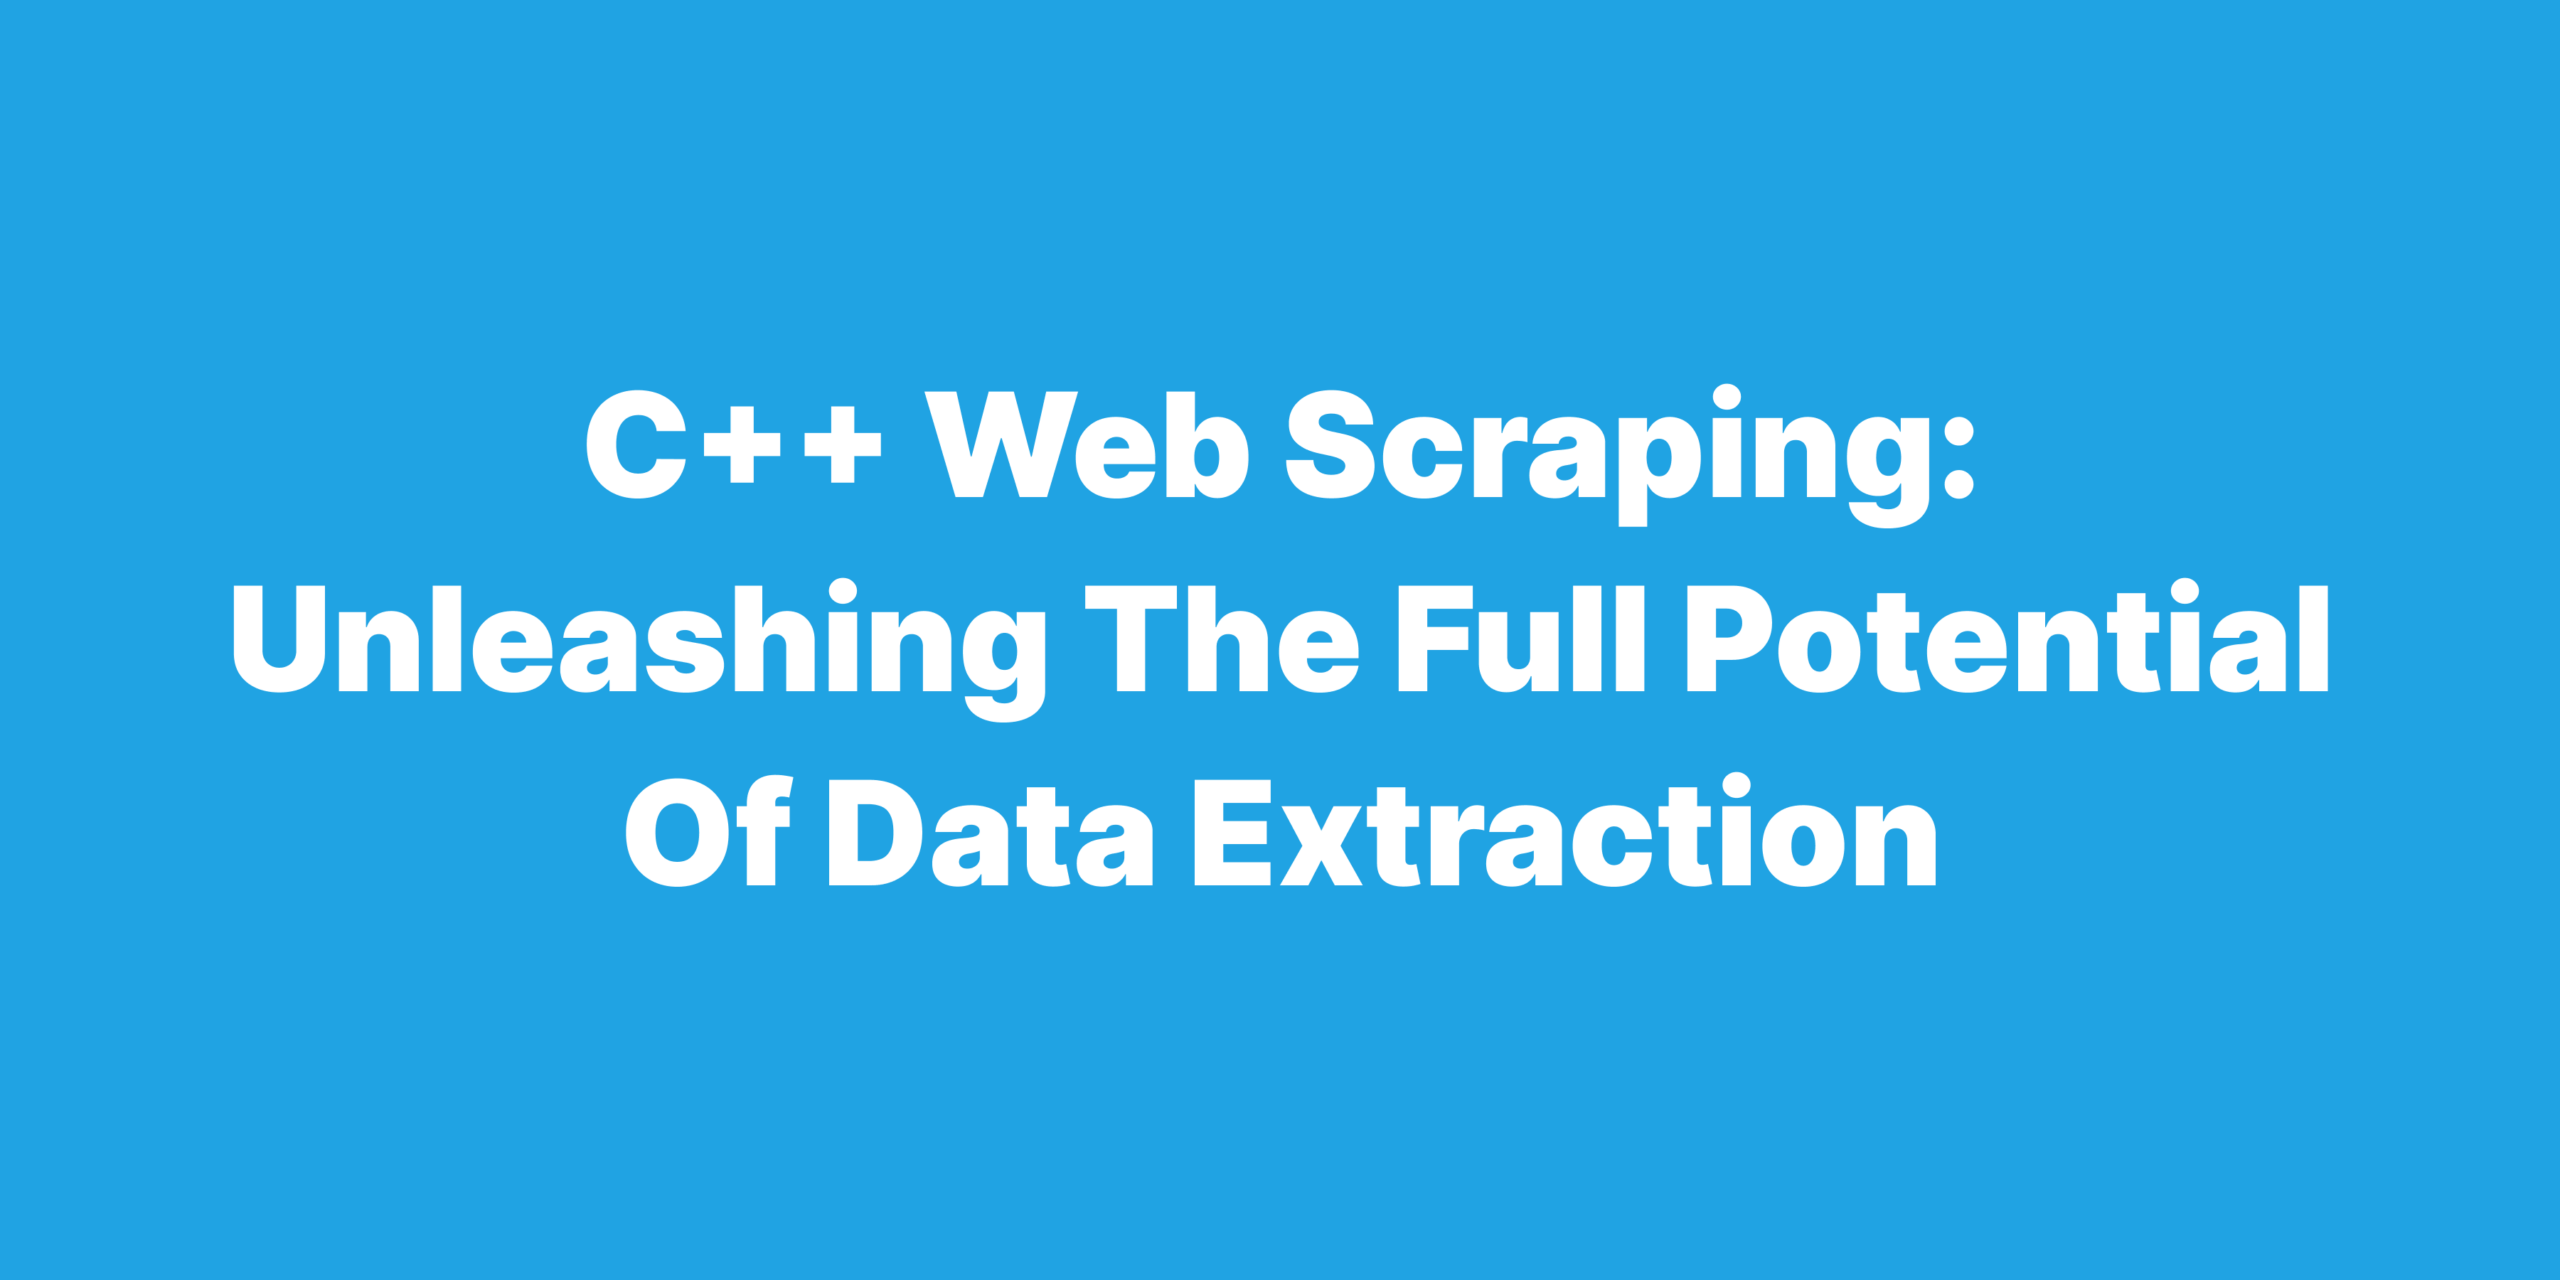 c++ web scraping unleashing the full potential of data extraction